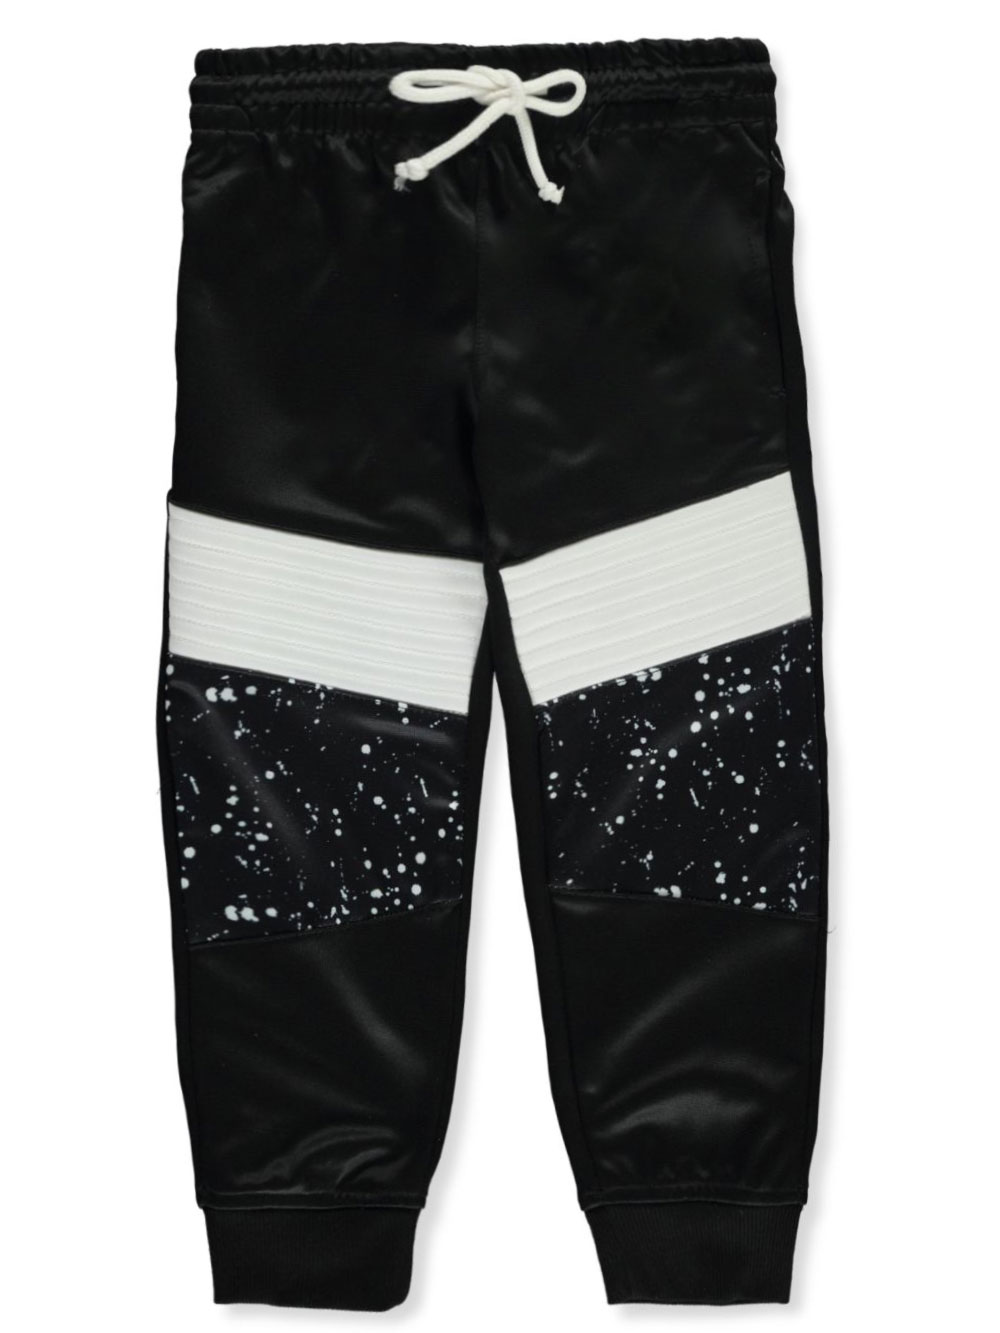 Size 4-5 Sweatpants for Boys